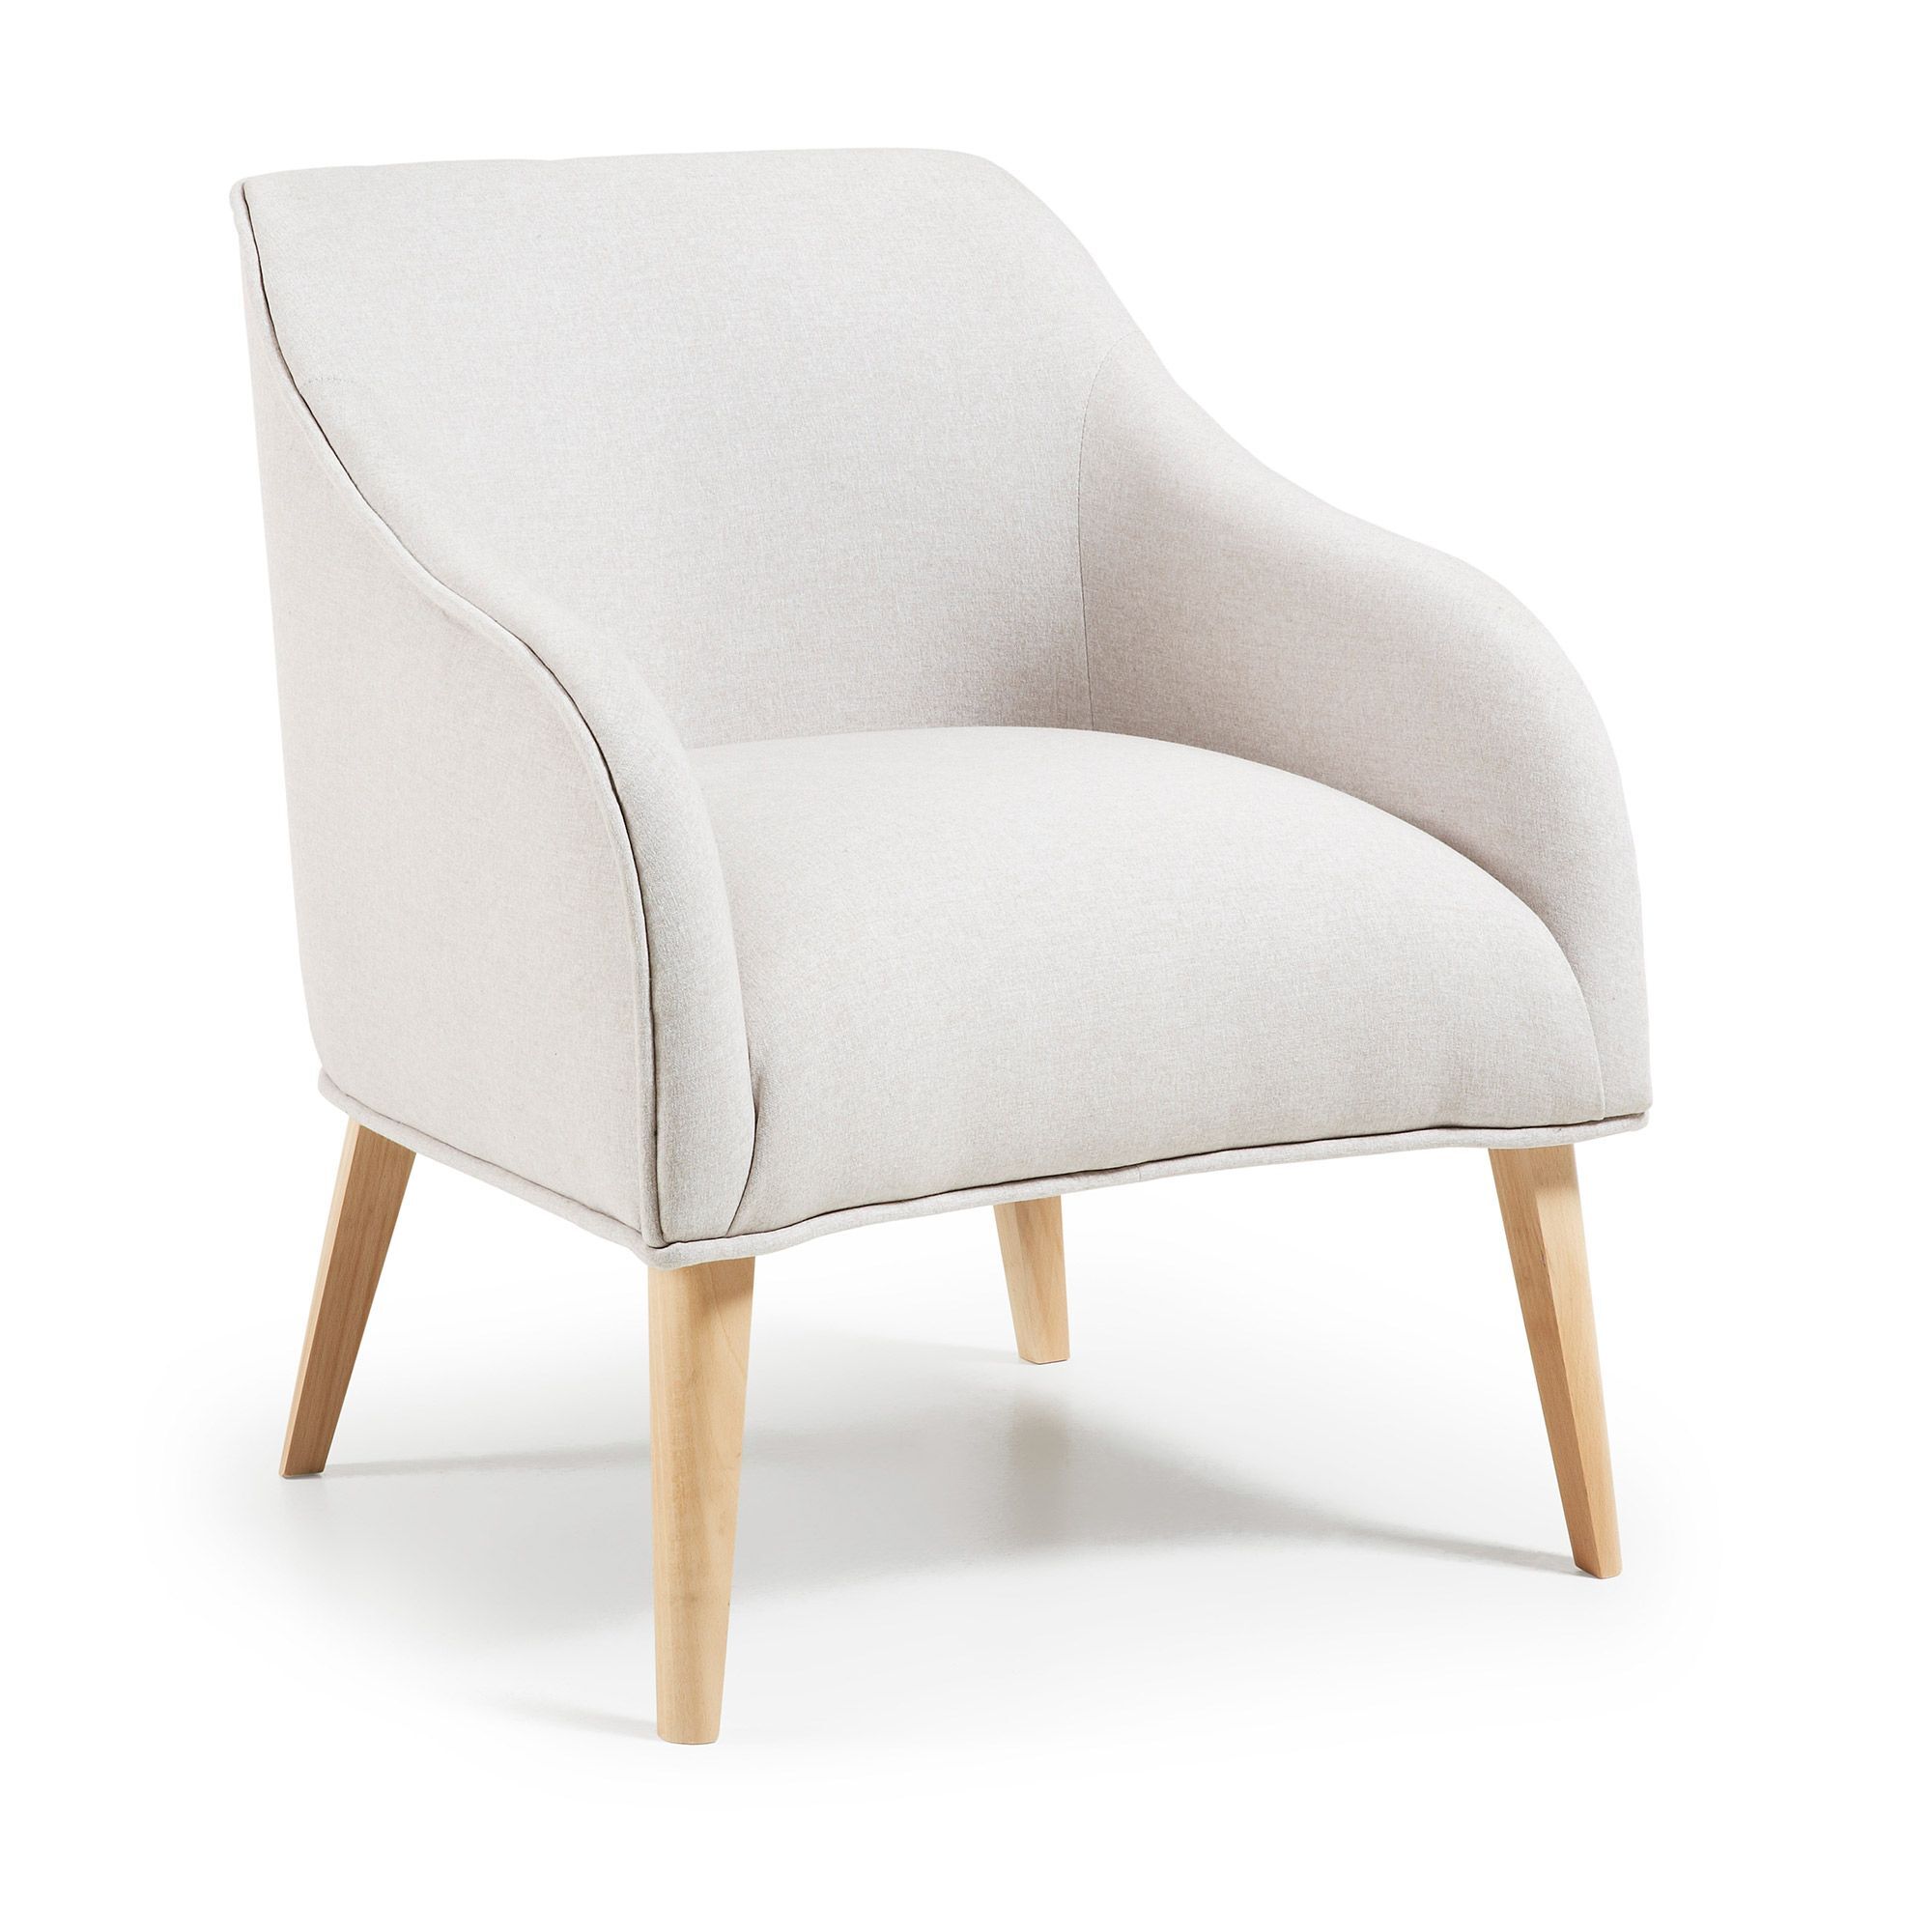 Kave Home - Lobby Loungestol m/armlen - Beige   Unoliving